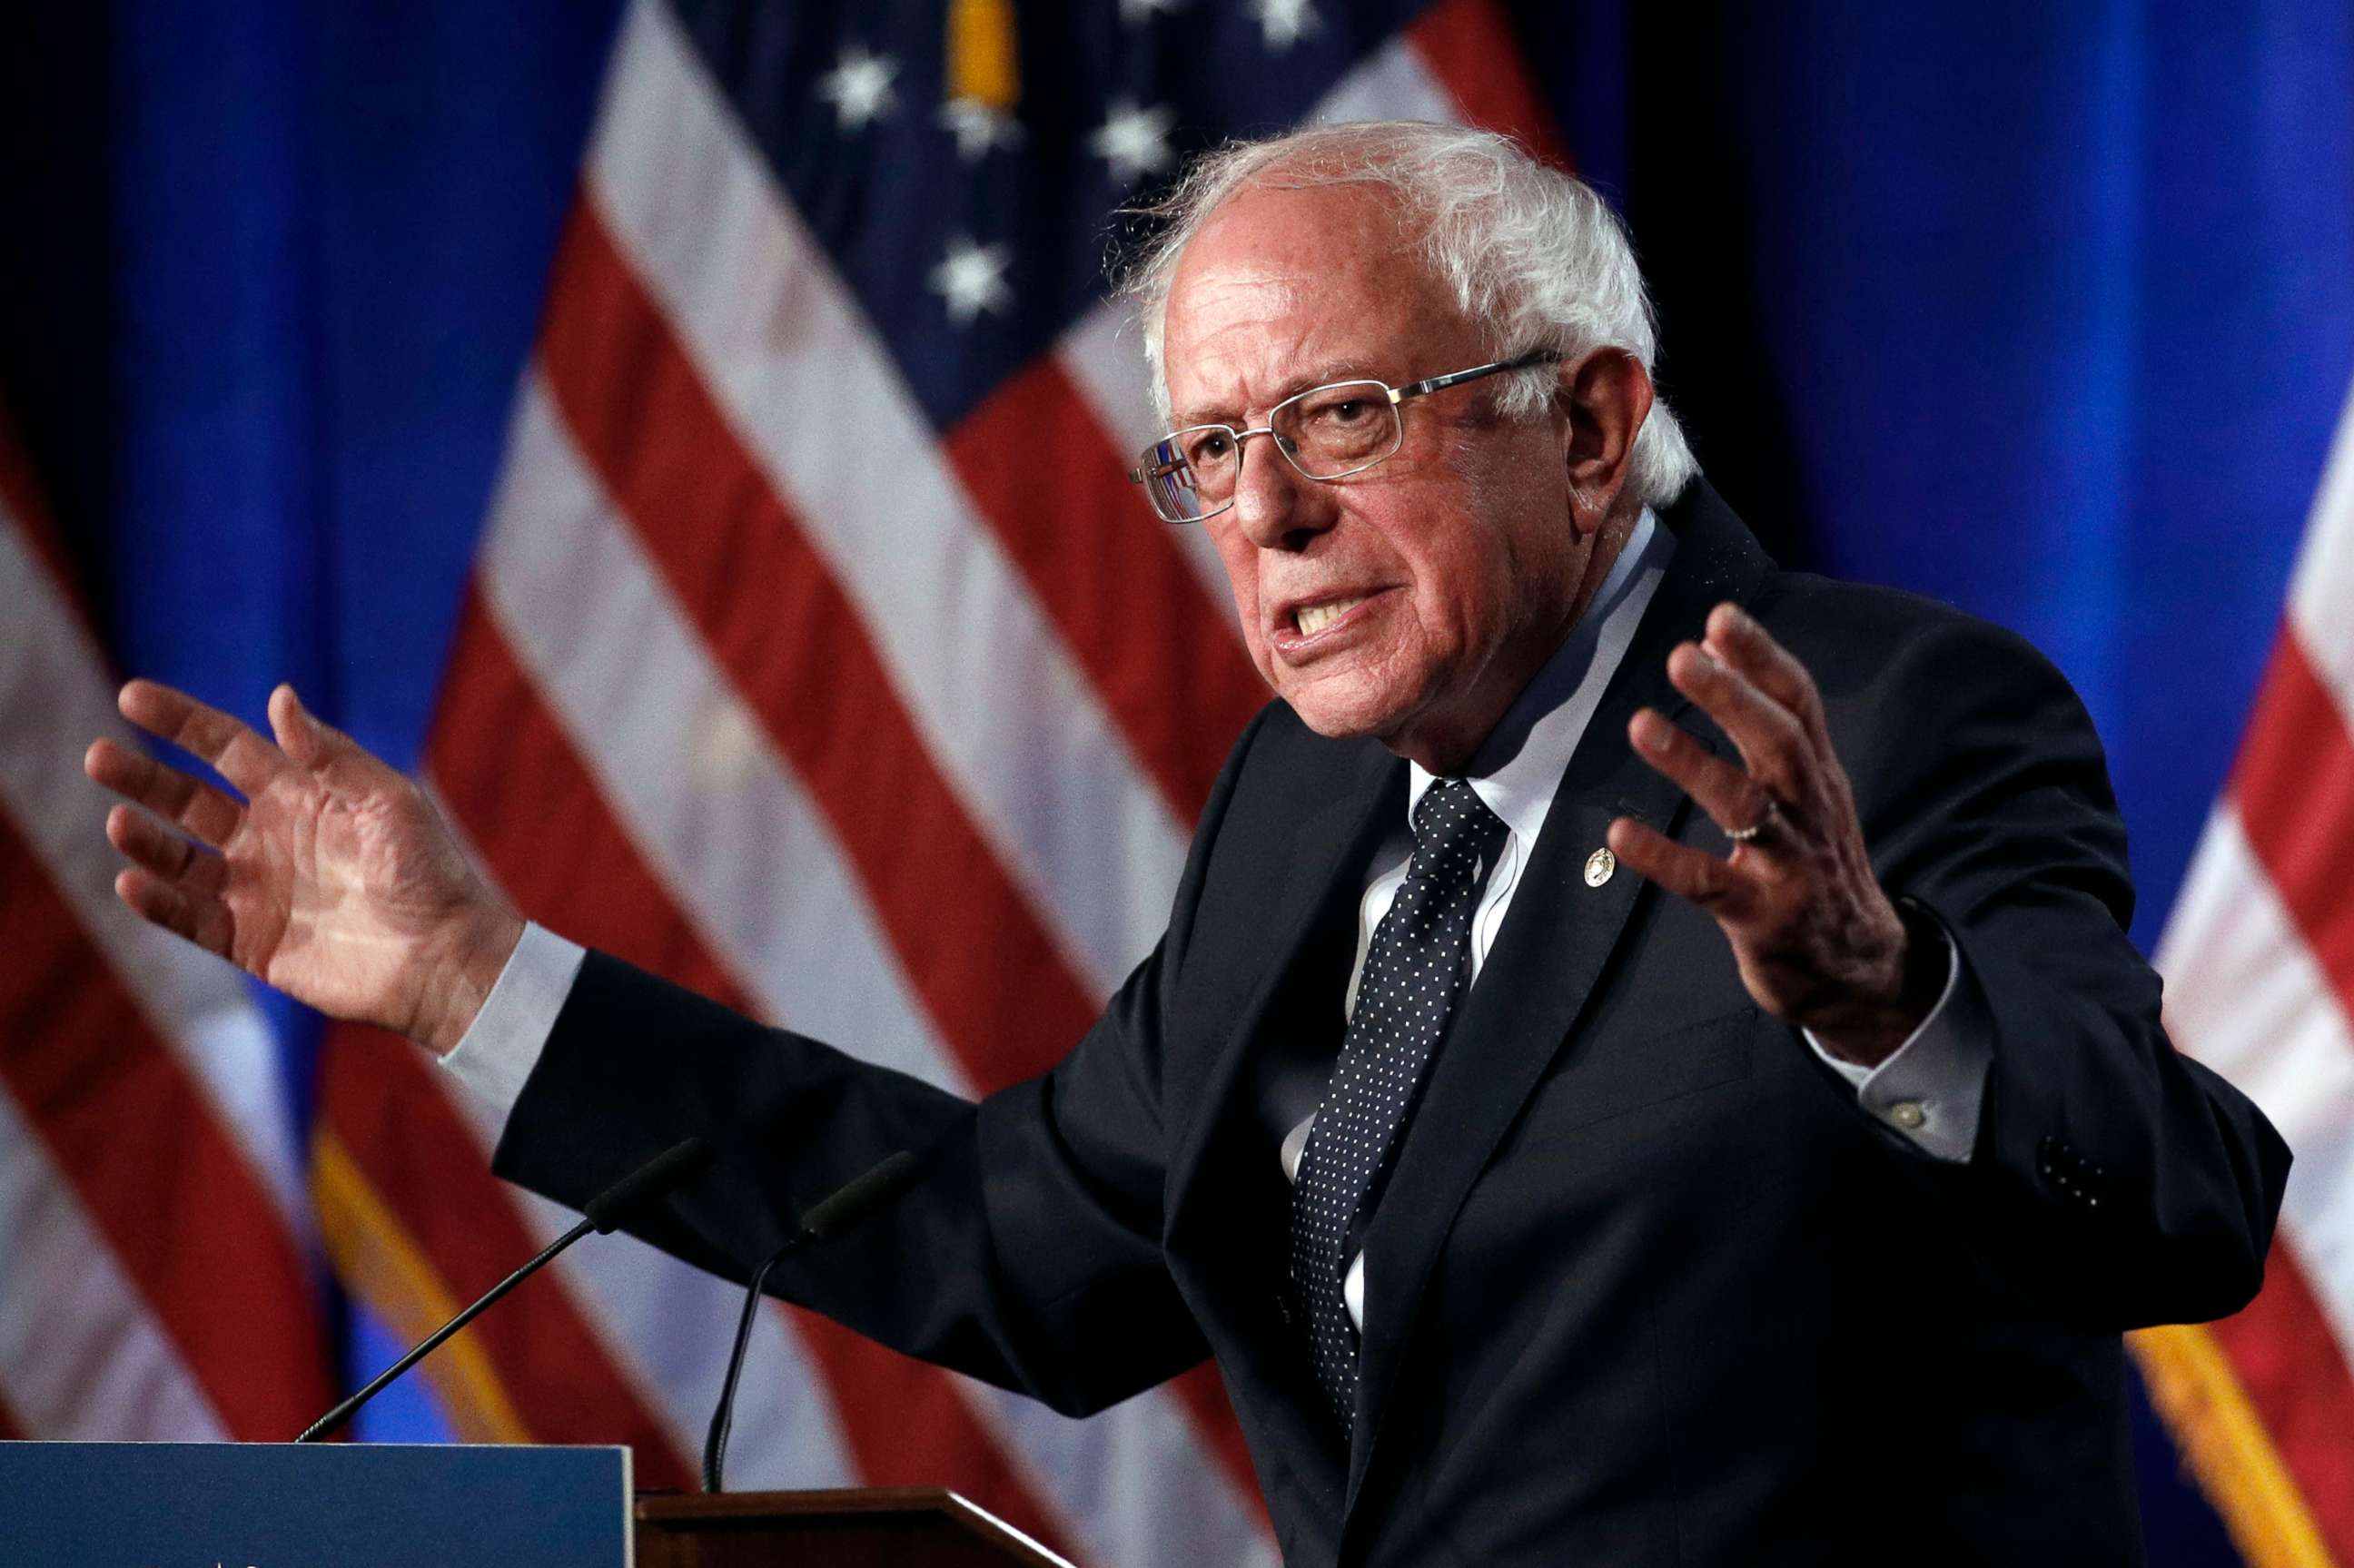 PHOTO: In this July 17, 2019, file photo, Democratic presidential candidate, Sen. Bernie Sanders speaks about his "Medicare for All" proposal at George Washington University in Washington.